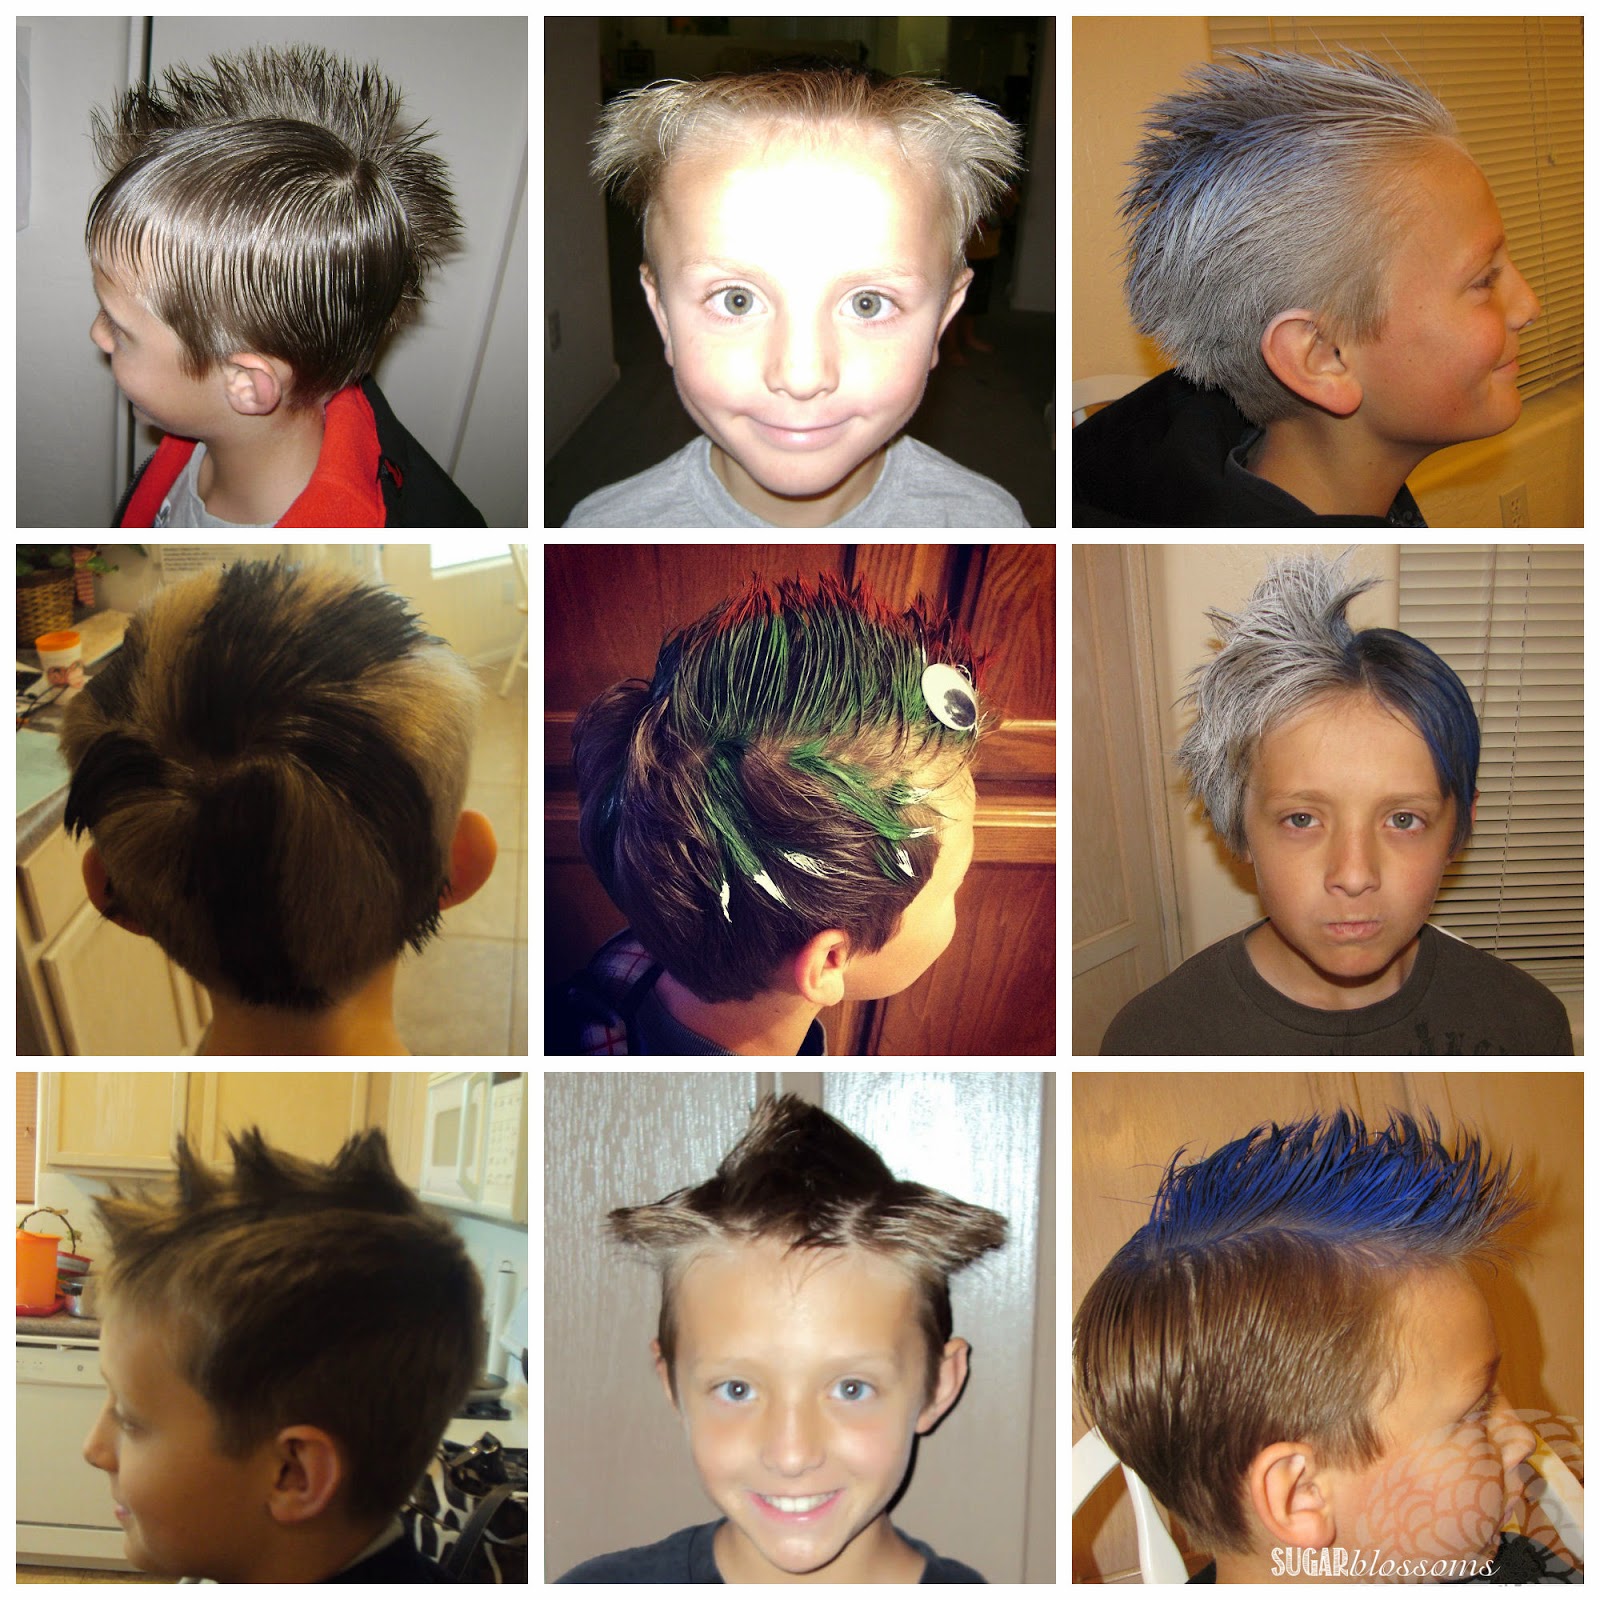 9 silly hair day ideas for kids - Today's Parent